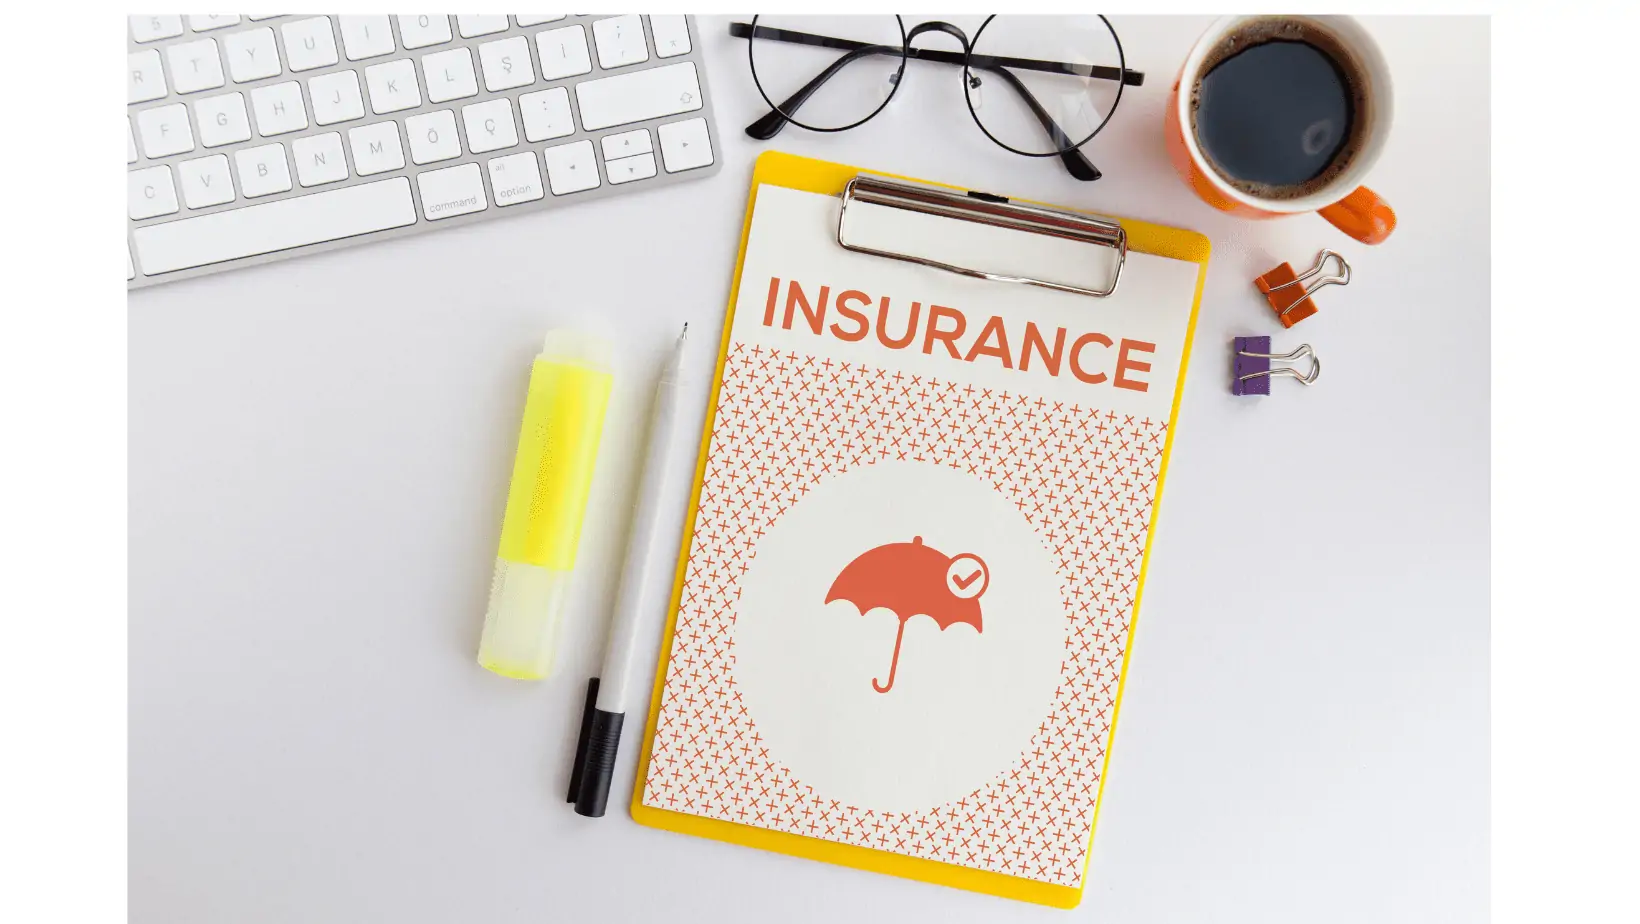 Insurance for small businesses in South Africa: What you need to know